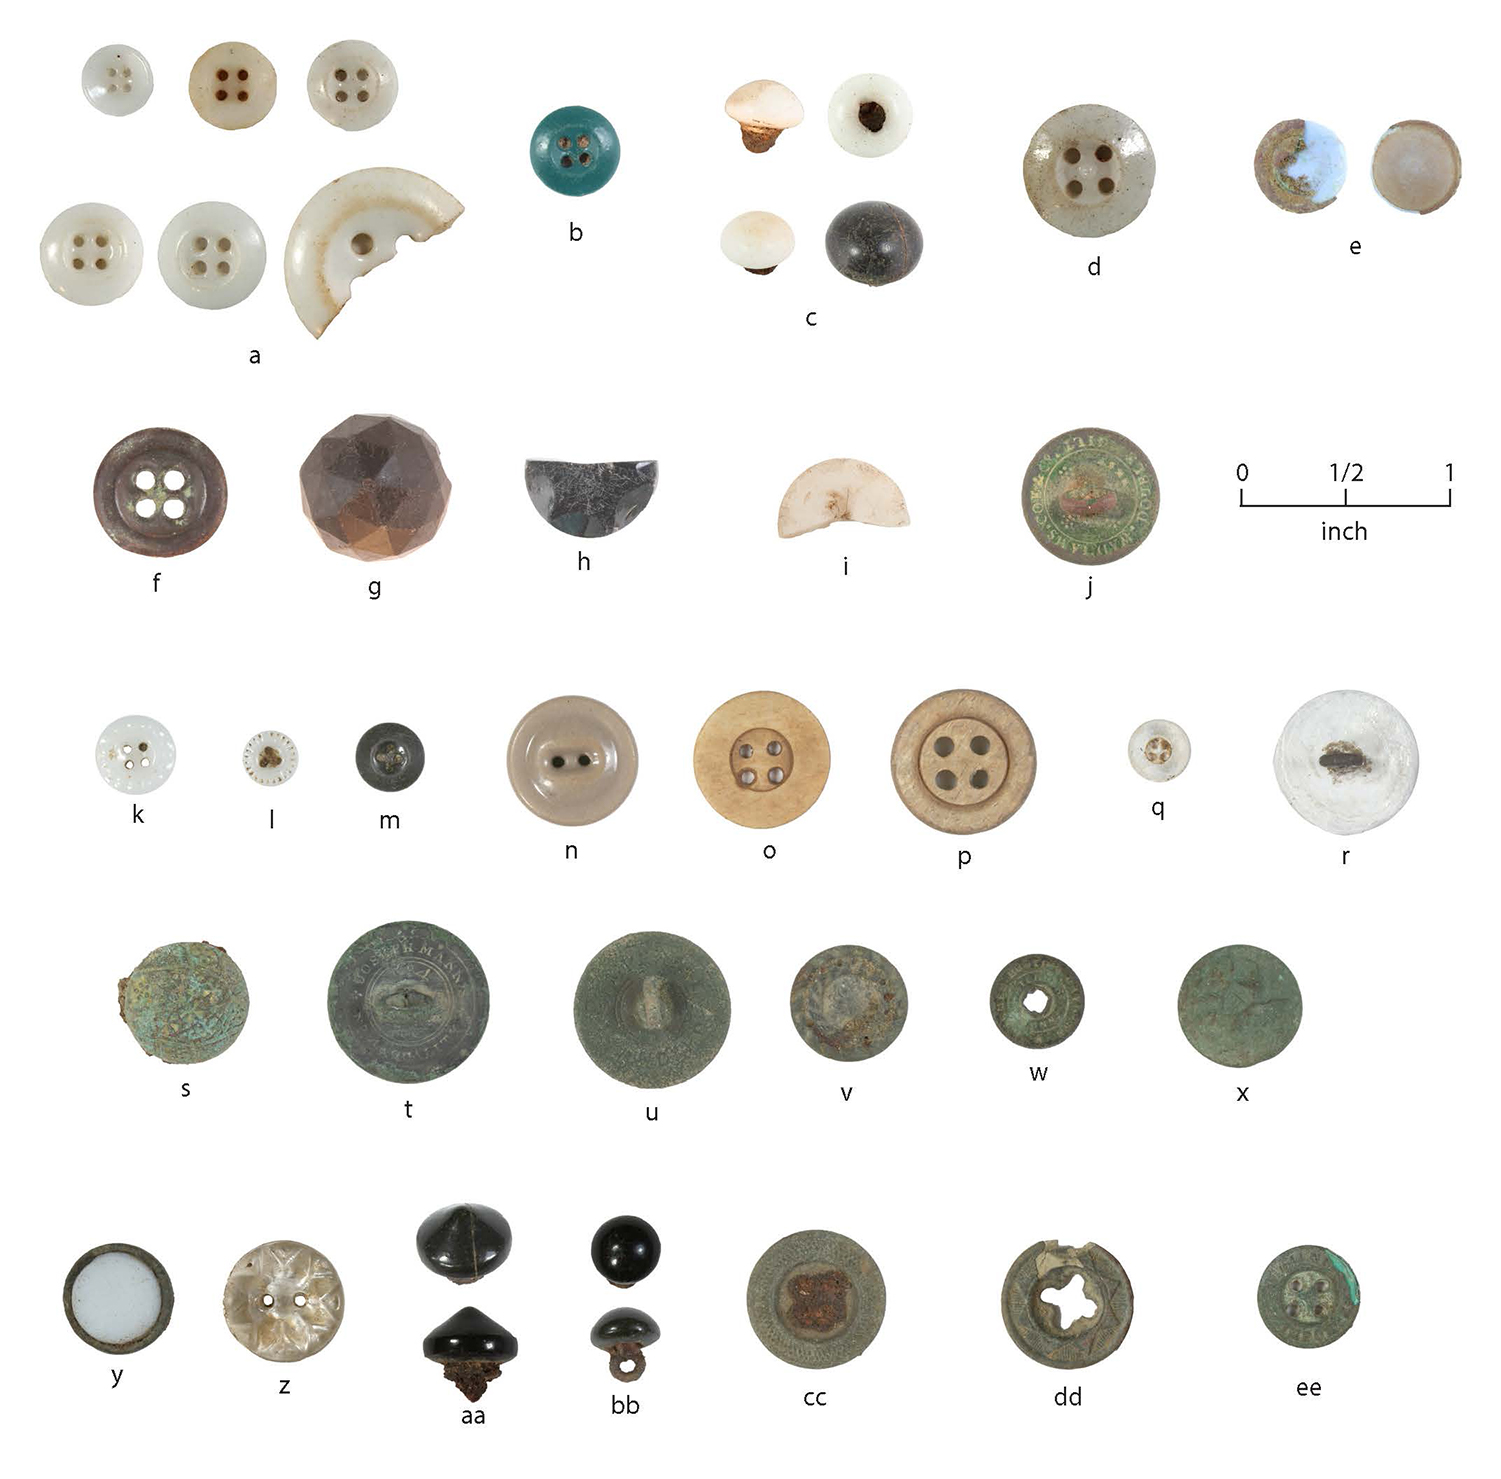 Dozens of 19th century buttons on a white background with a scale bar.